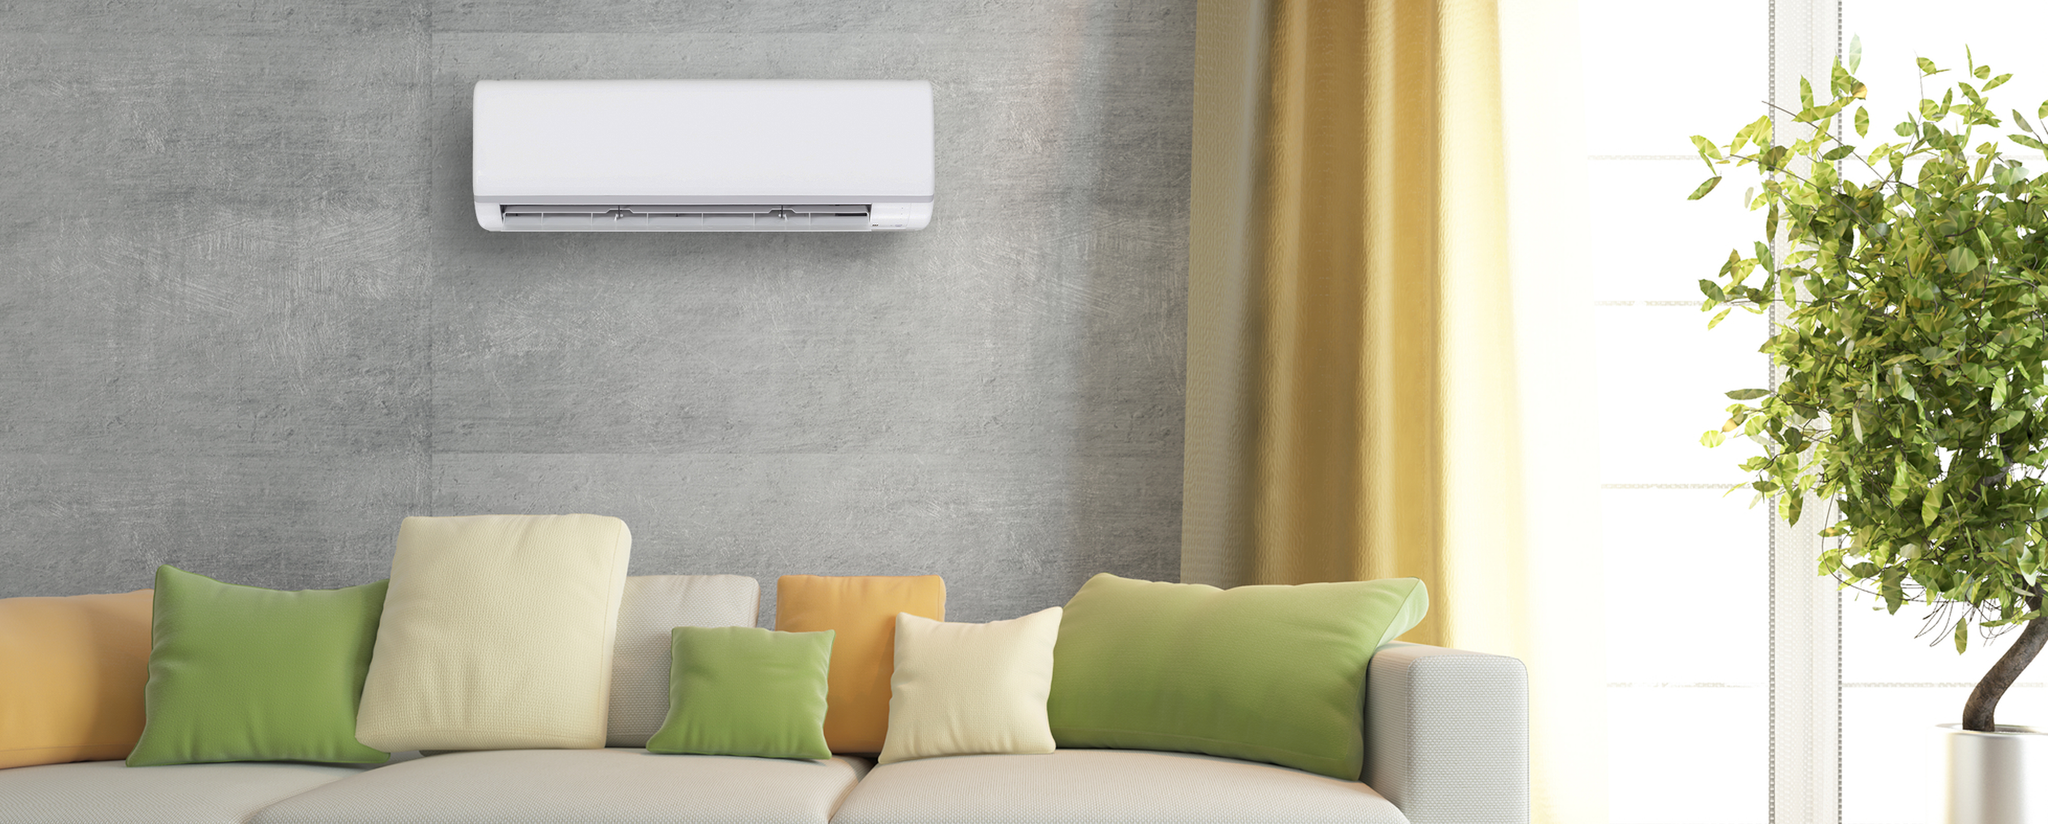 How to save from the air conditioner?